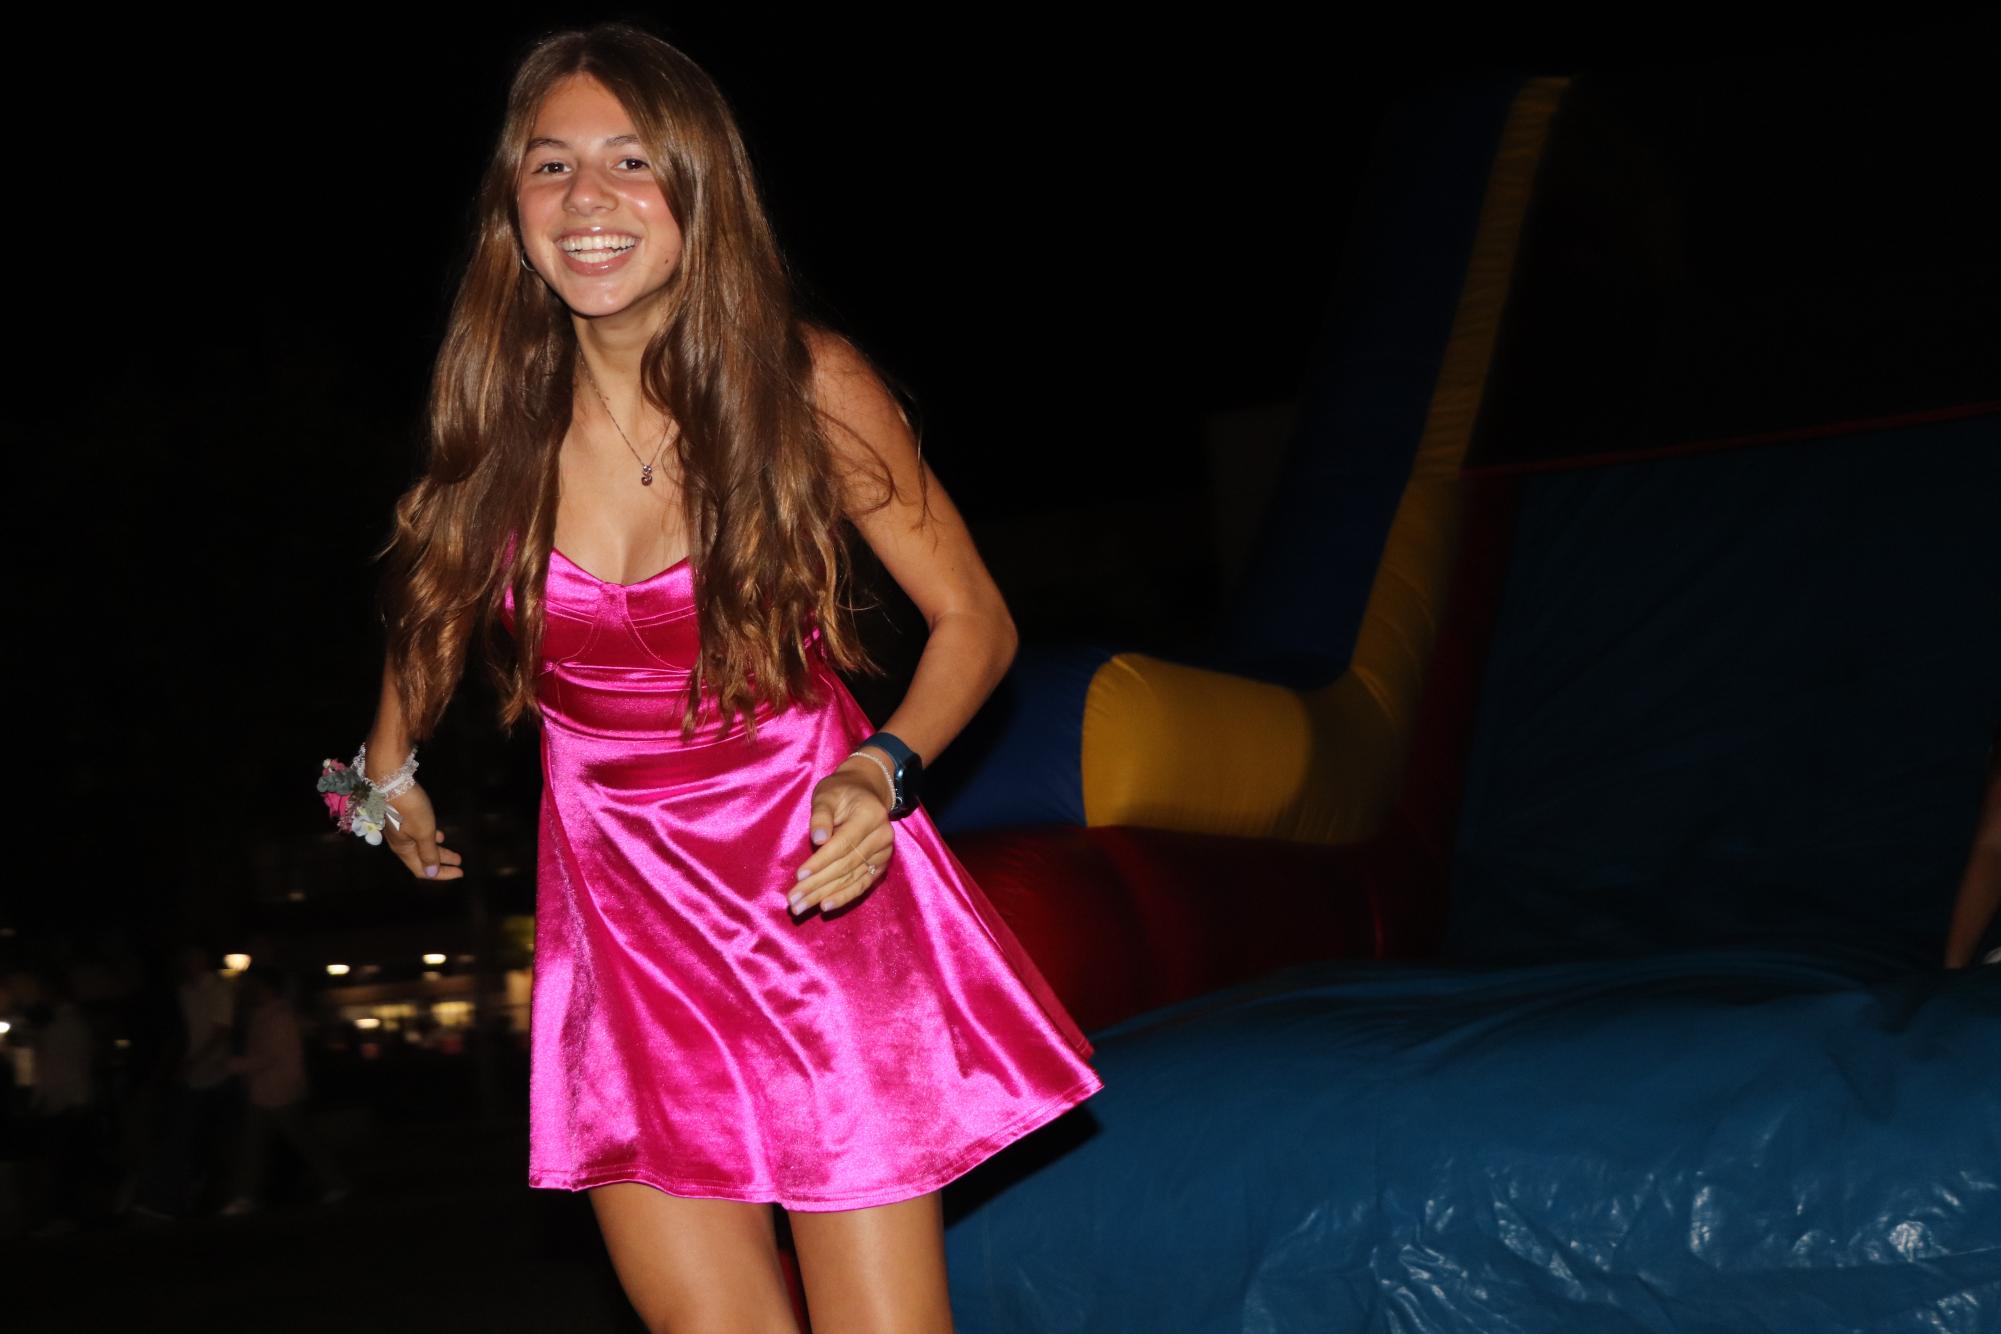 Photo taken at homecoming on Oct. 7. Student smiling after getting off of the inflatable slide.